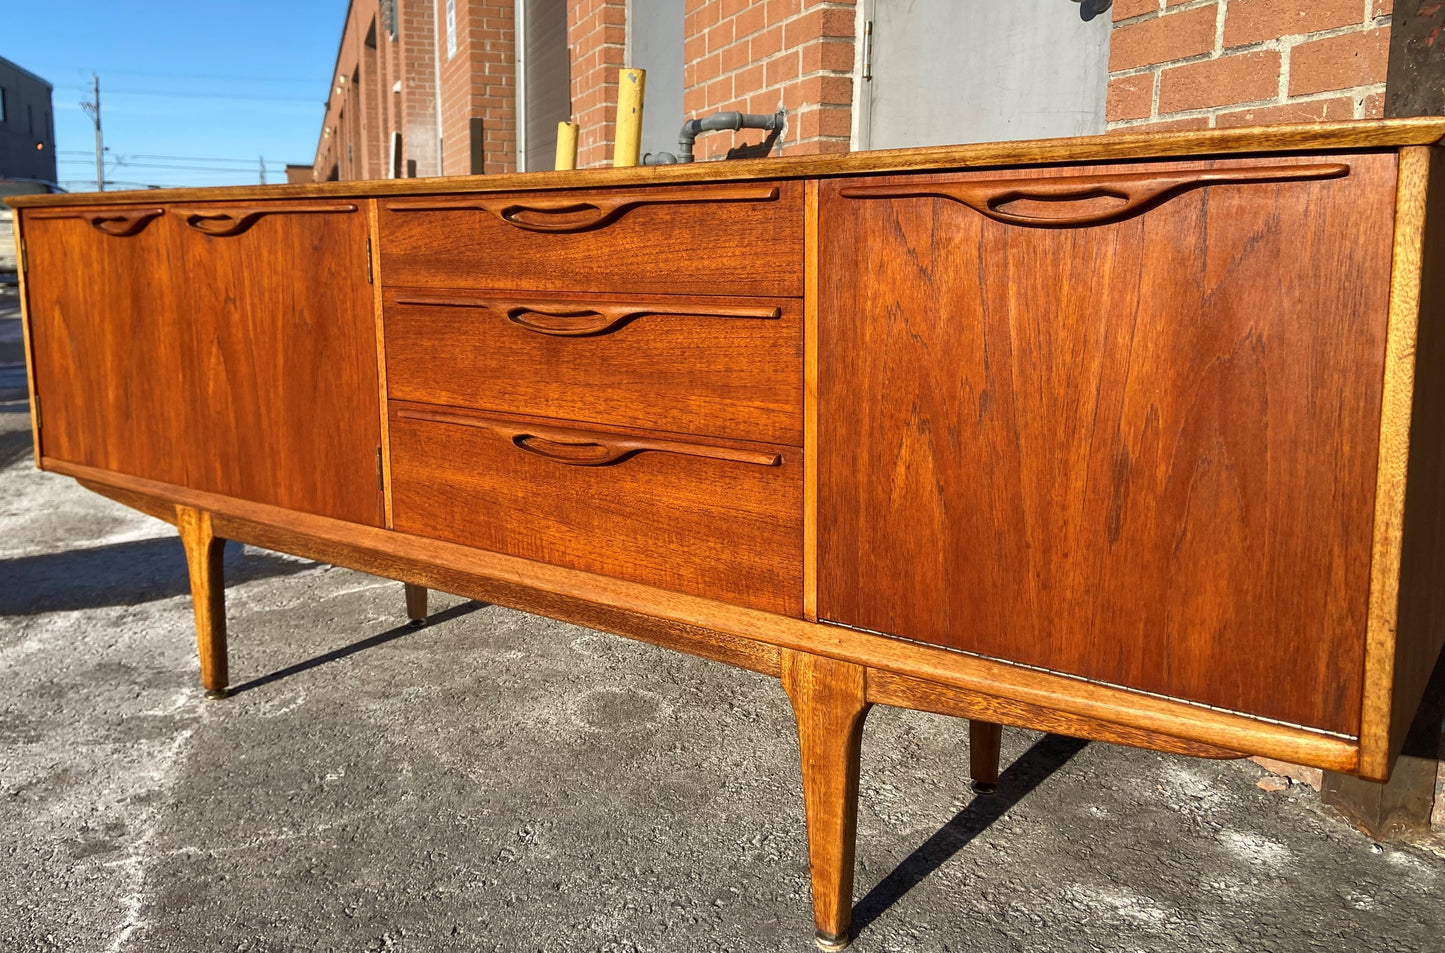 REFINISHED Mid Century Modern Sideboard by T.Robertson for McIntosh 78", Perfect